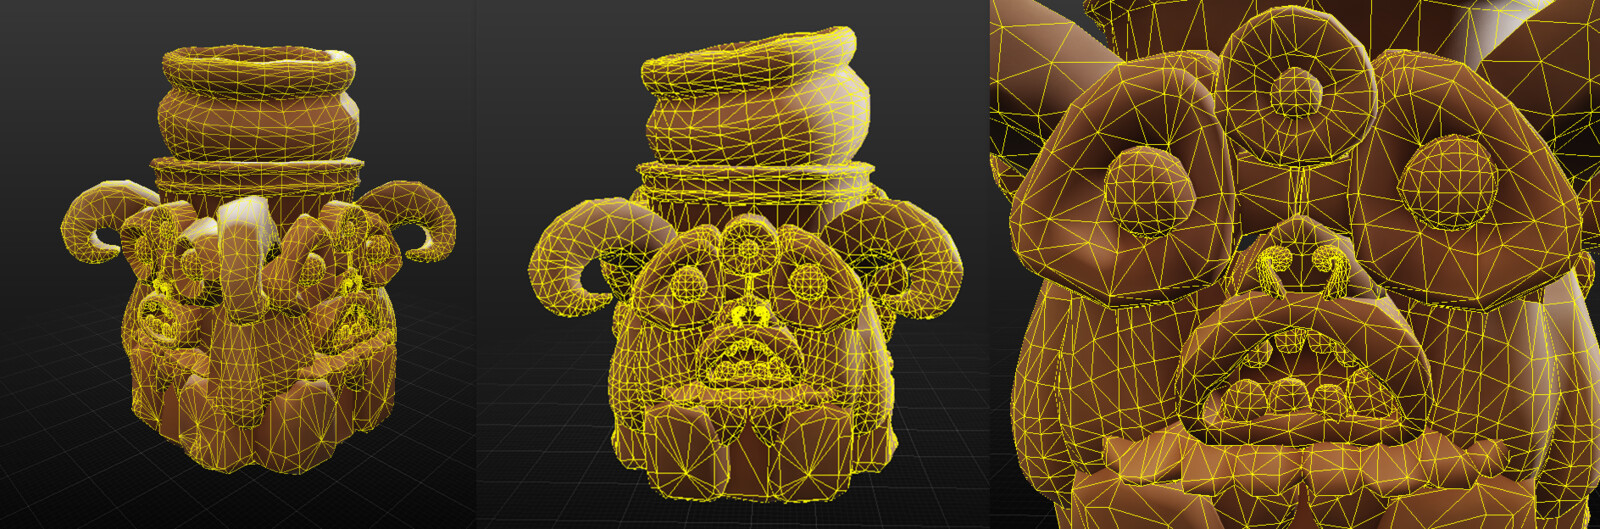 Totem Wireframe. it has about 19k tris